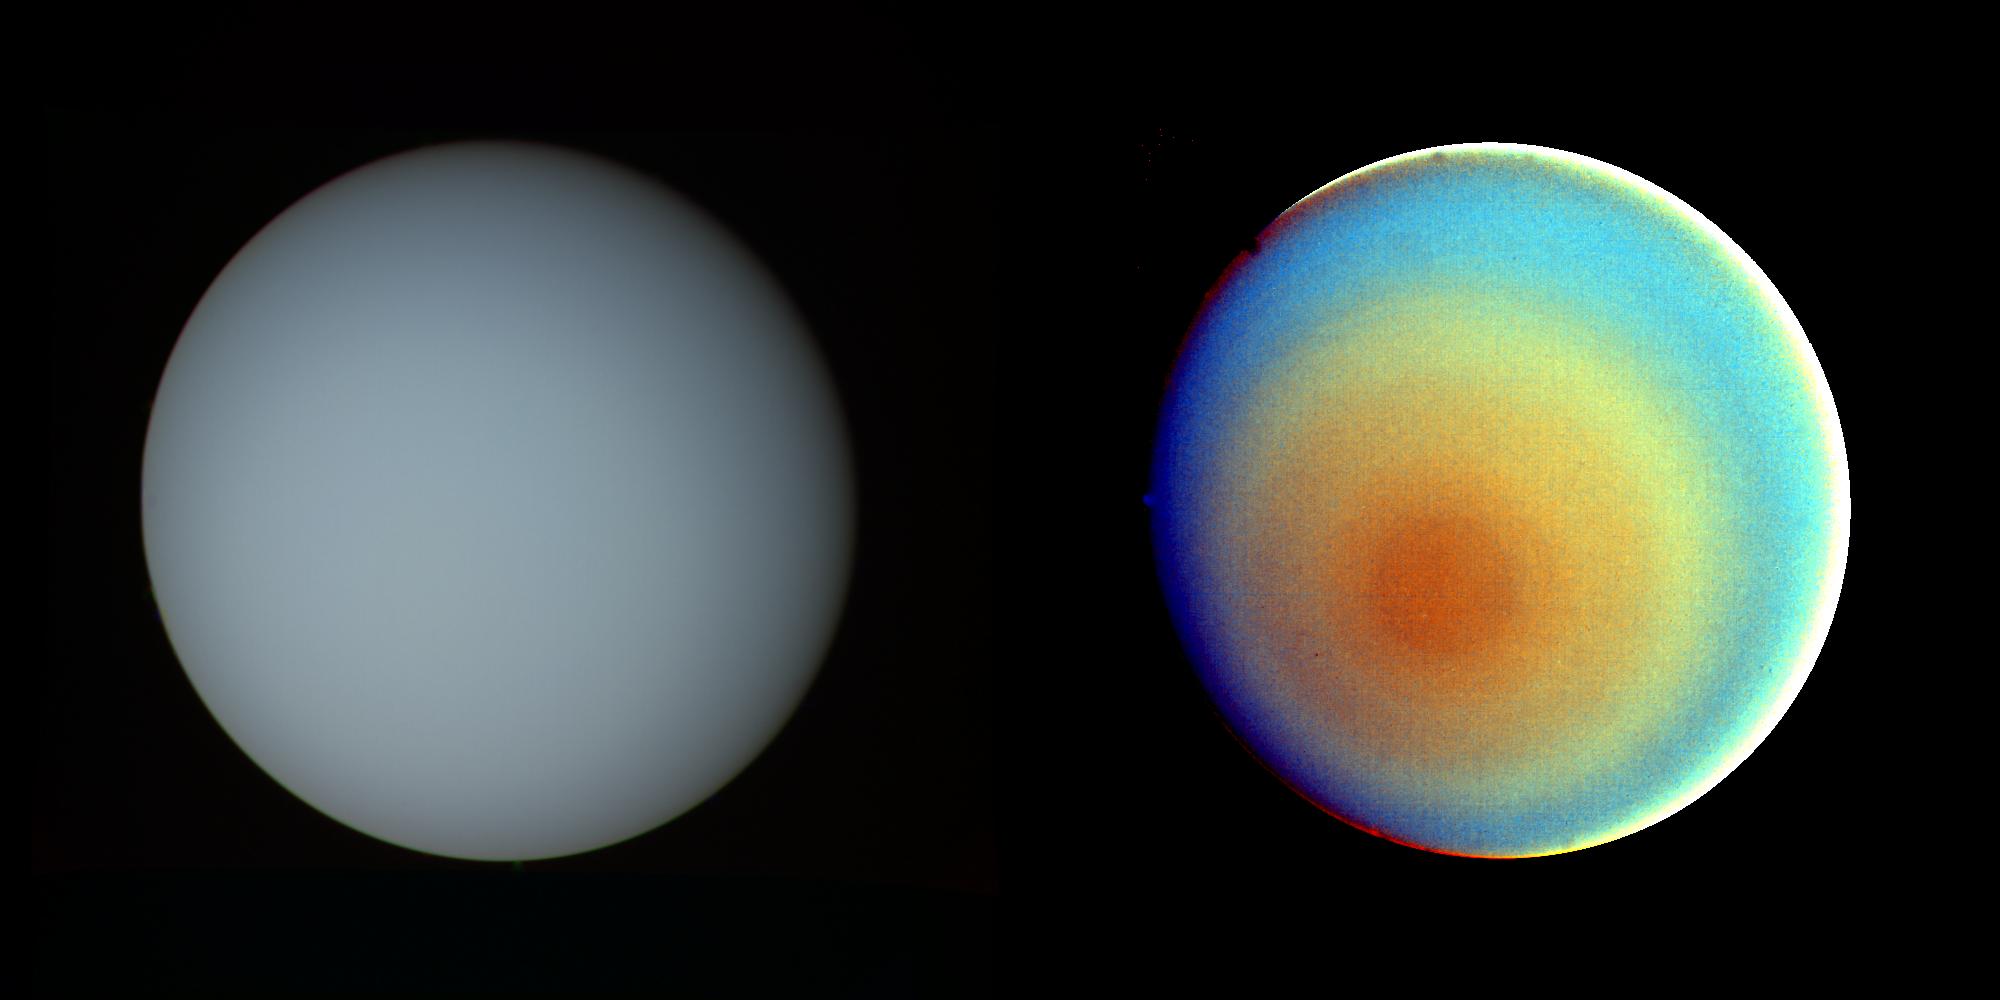 Two images of Uranus side-by-side. The left image shows Uranus in its true light blue color. The right images reveals the atmosphere in false color.